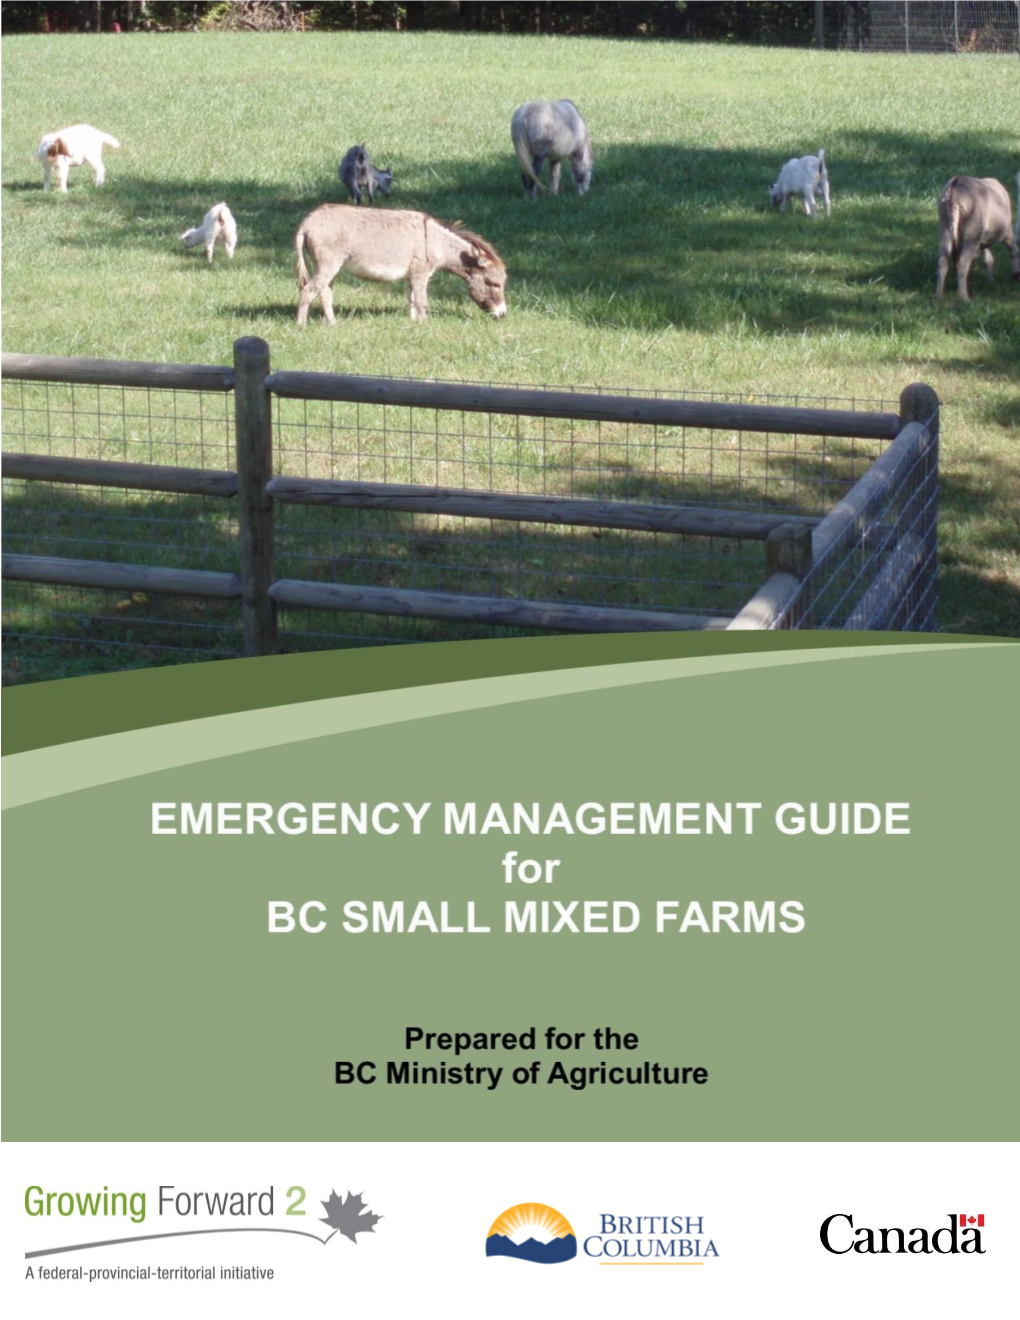 Emergency Management Guide for B.C. Small Mixed Farms